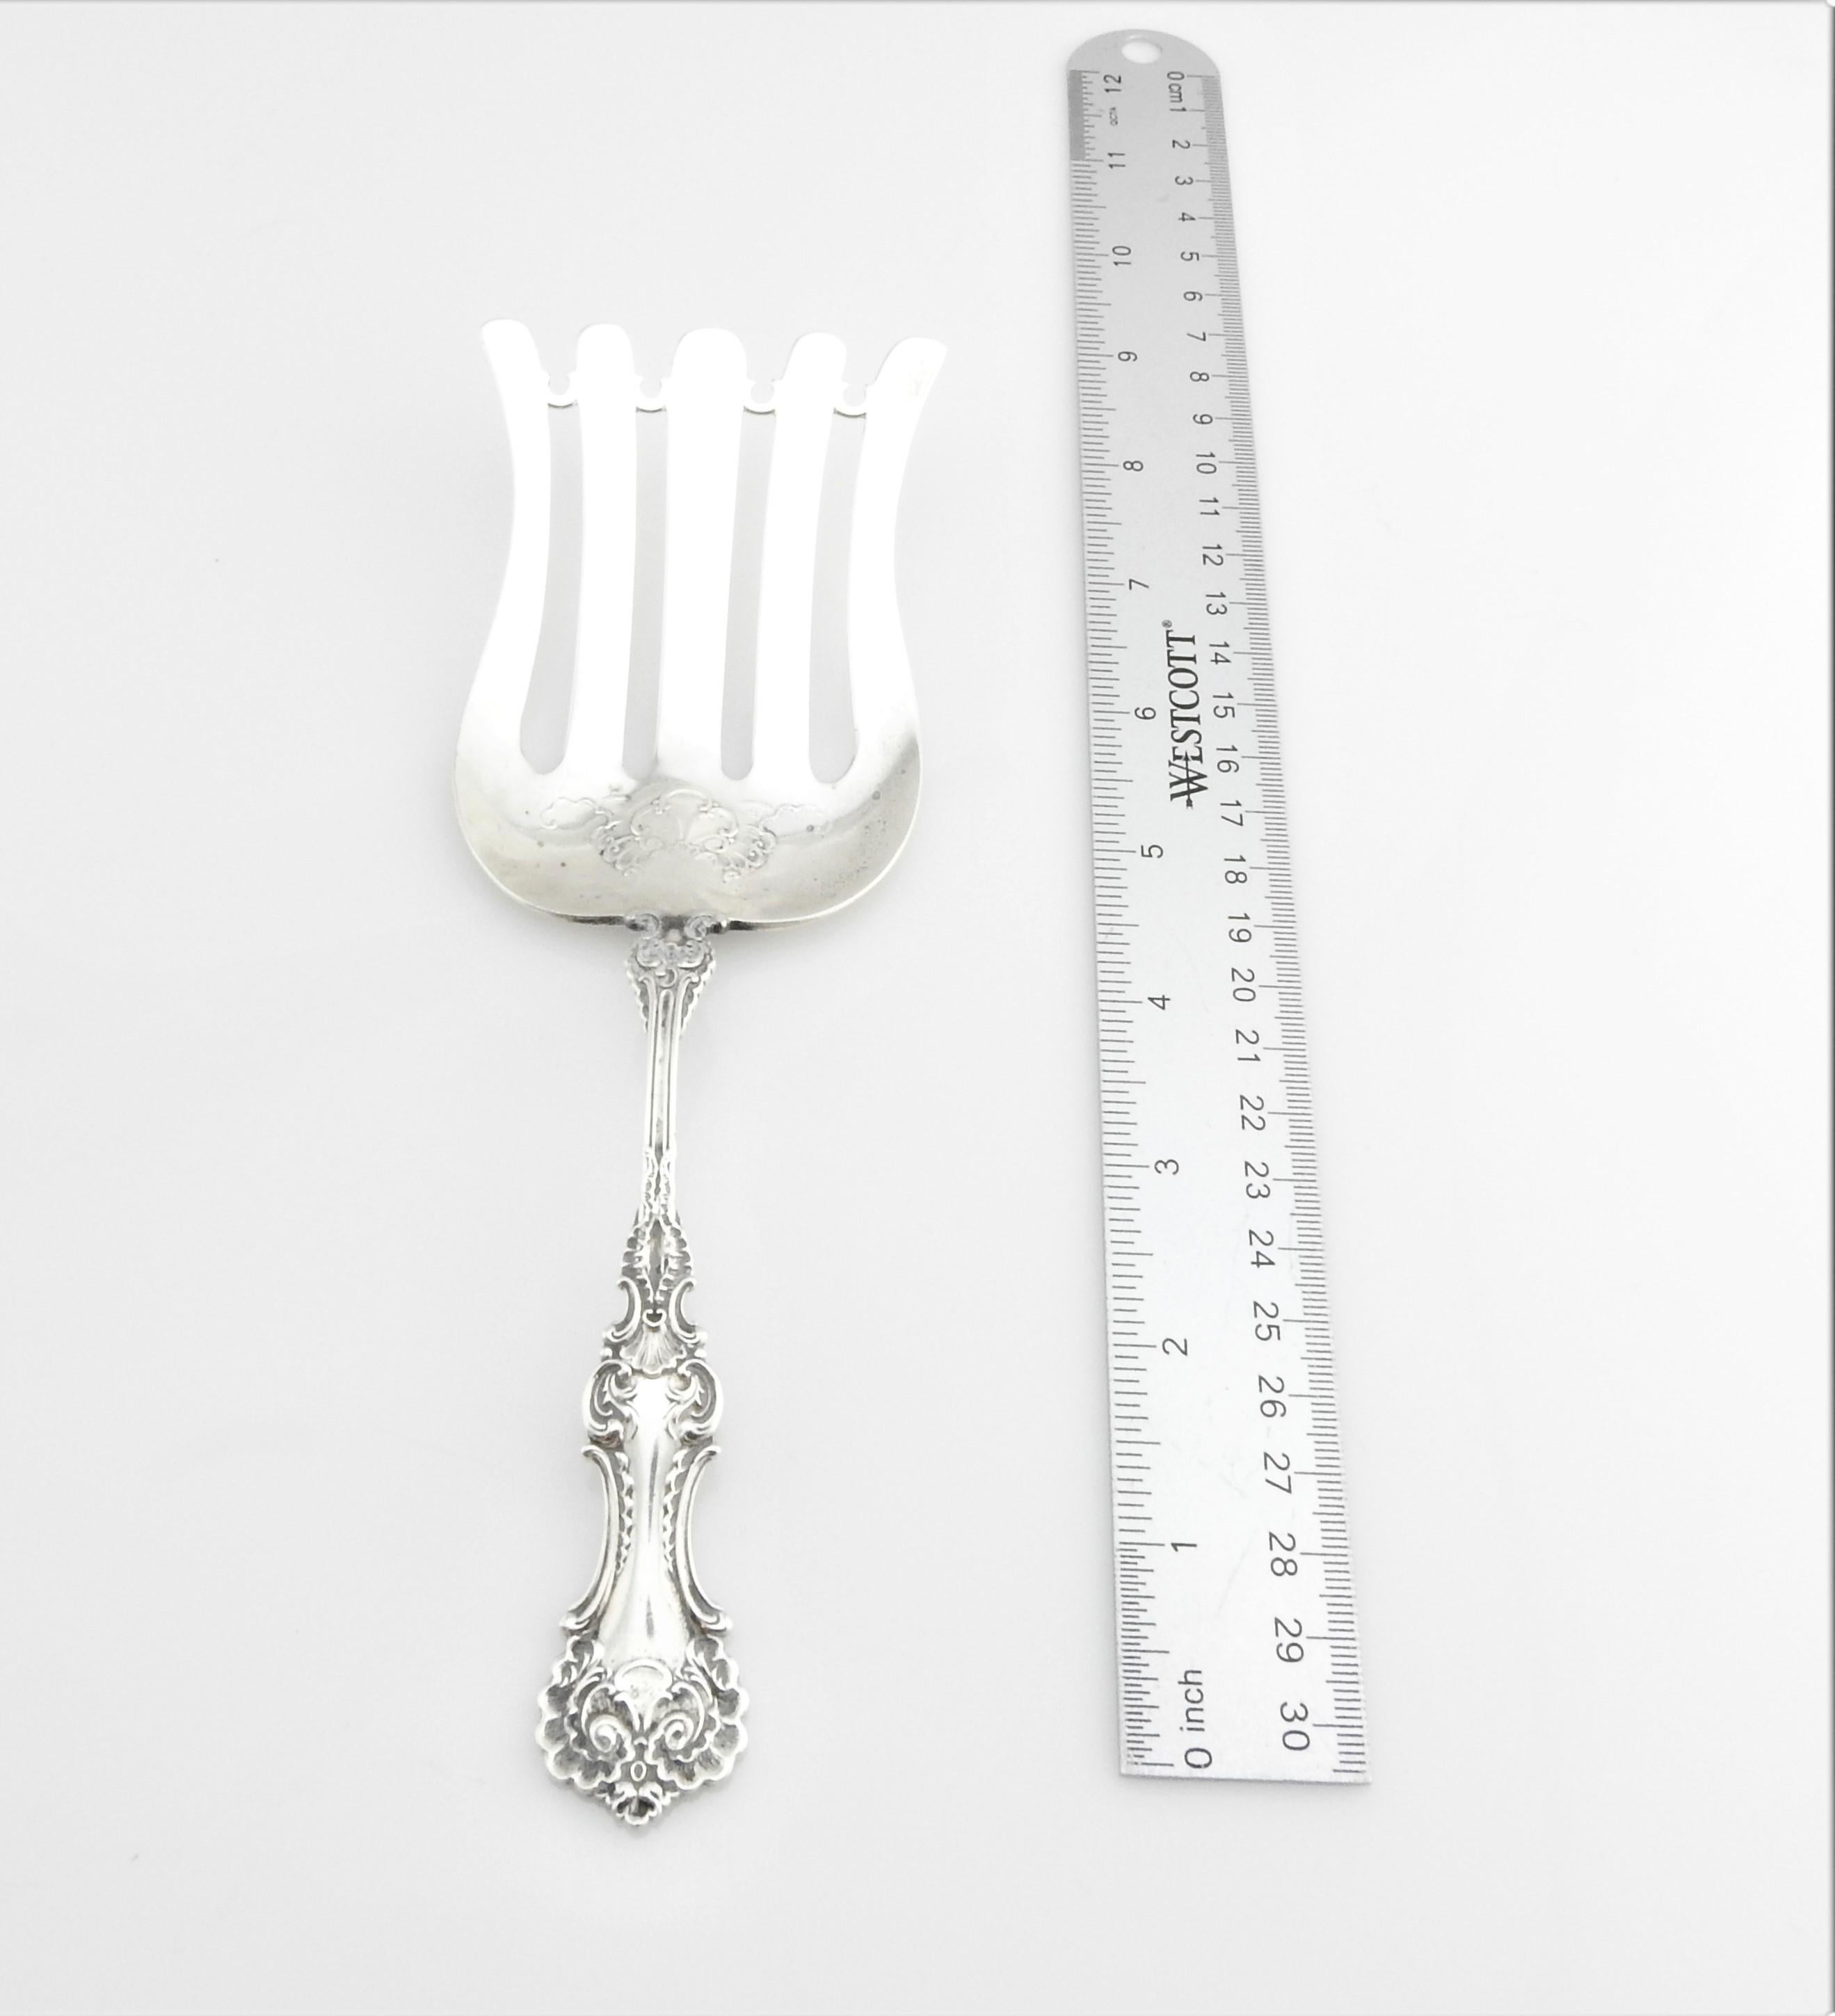 Pompadour by Whiting Sterling Silver Asparagus Server 4